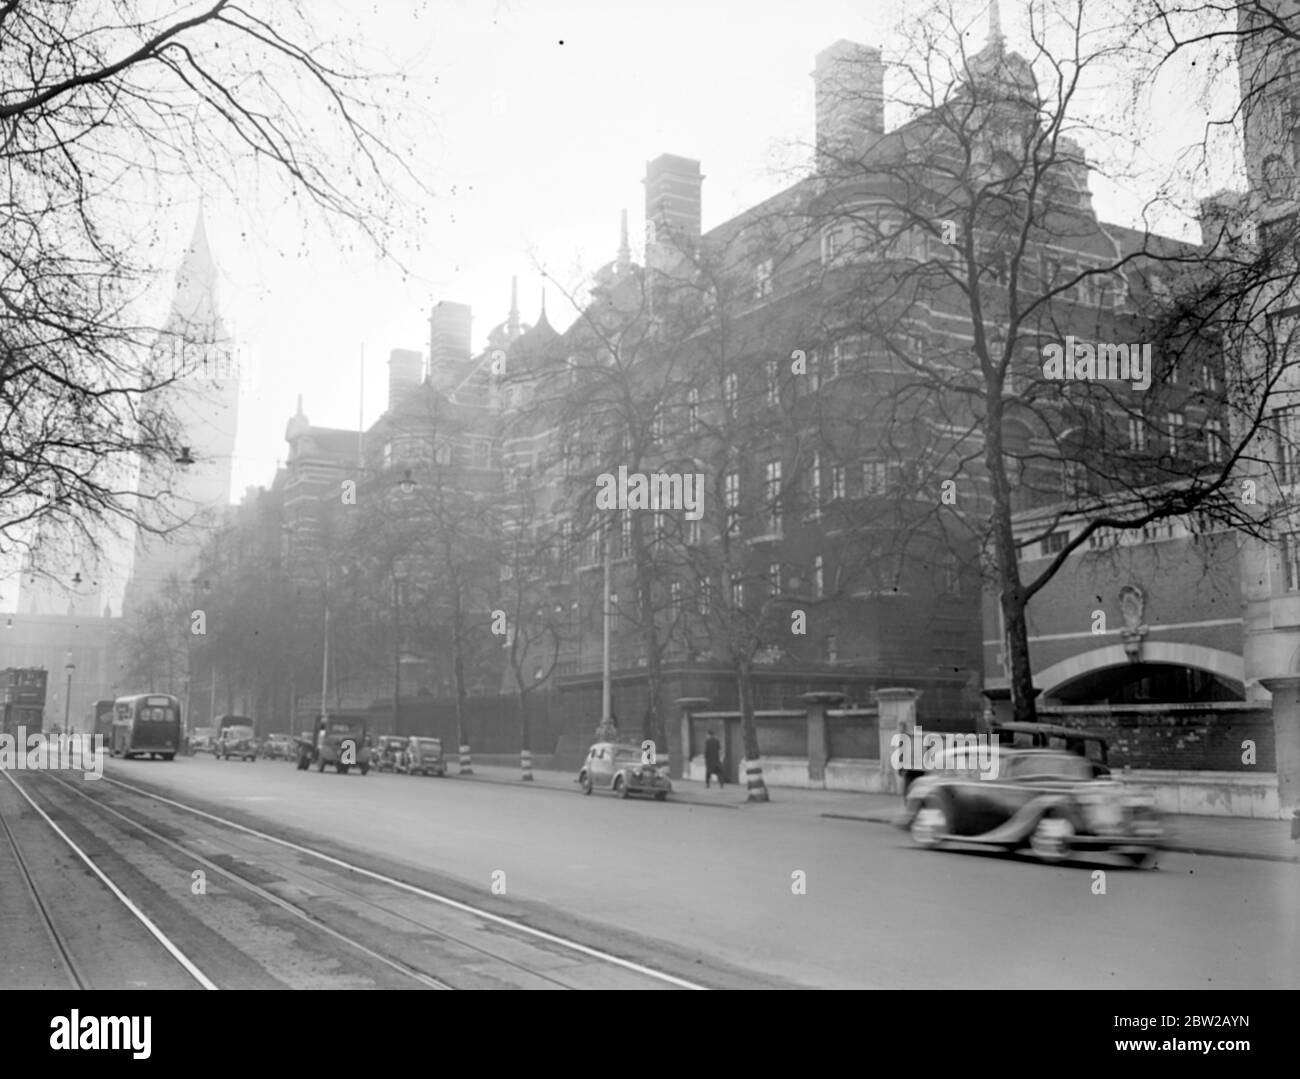 The Norman Shaw Buildings (formerly known as New Scotland Yard), Victoria Embankment. Parliament and Big Ben tower in the background. [No original caption, date] 1930s, 1940s Stock Photo